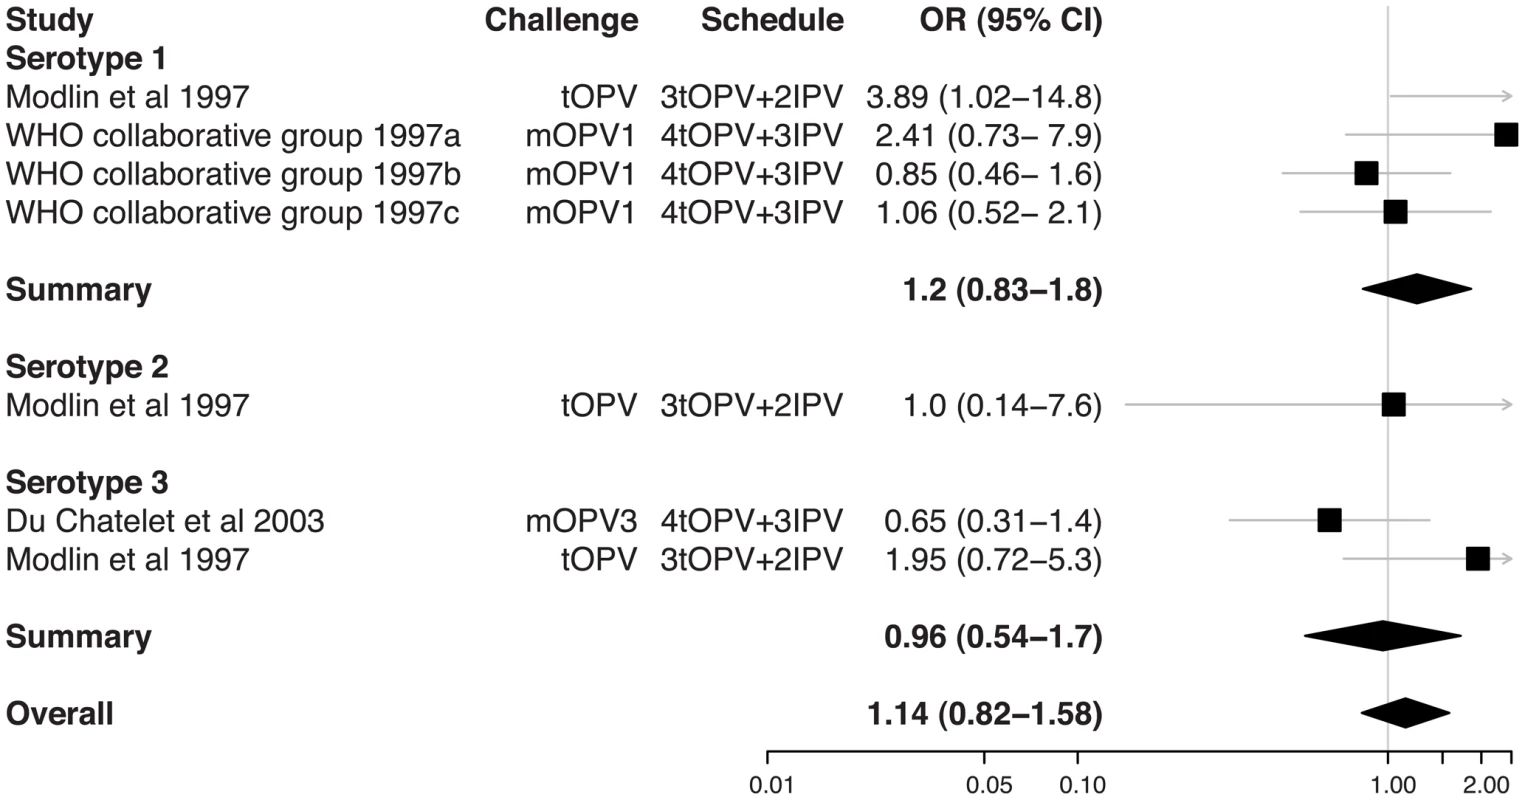 Relative odds of shedding vaccine poliovirus after challenge among individuals vaccinated with IPV in addition to OPV compared with individuals vaccinated with OPV only.